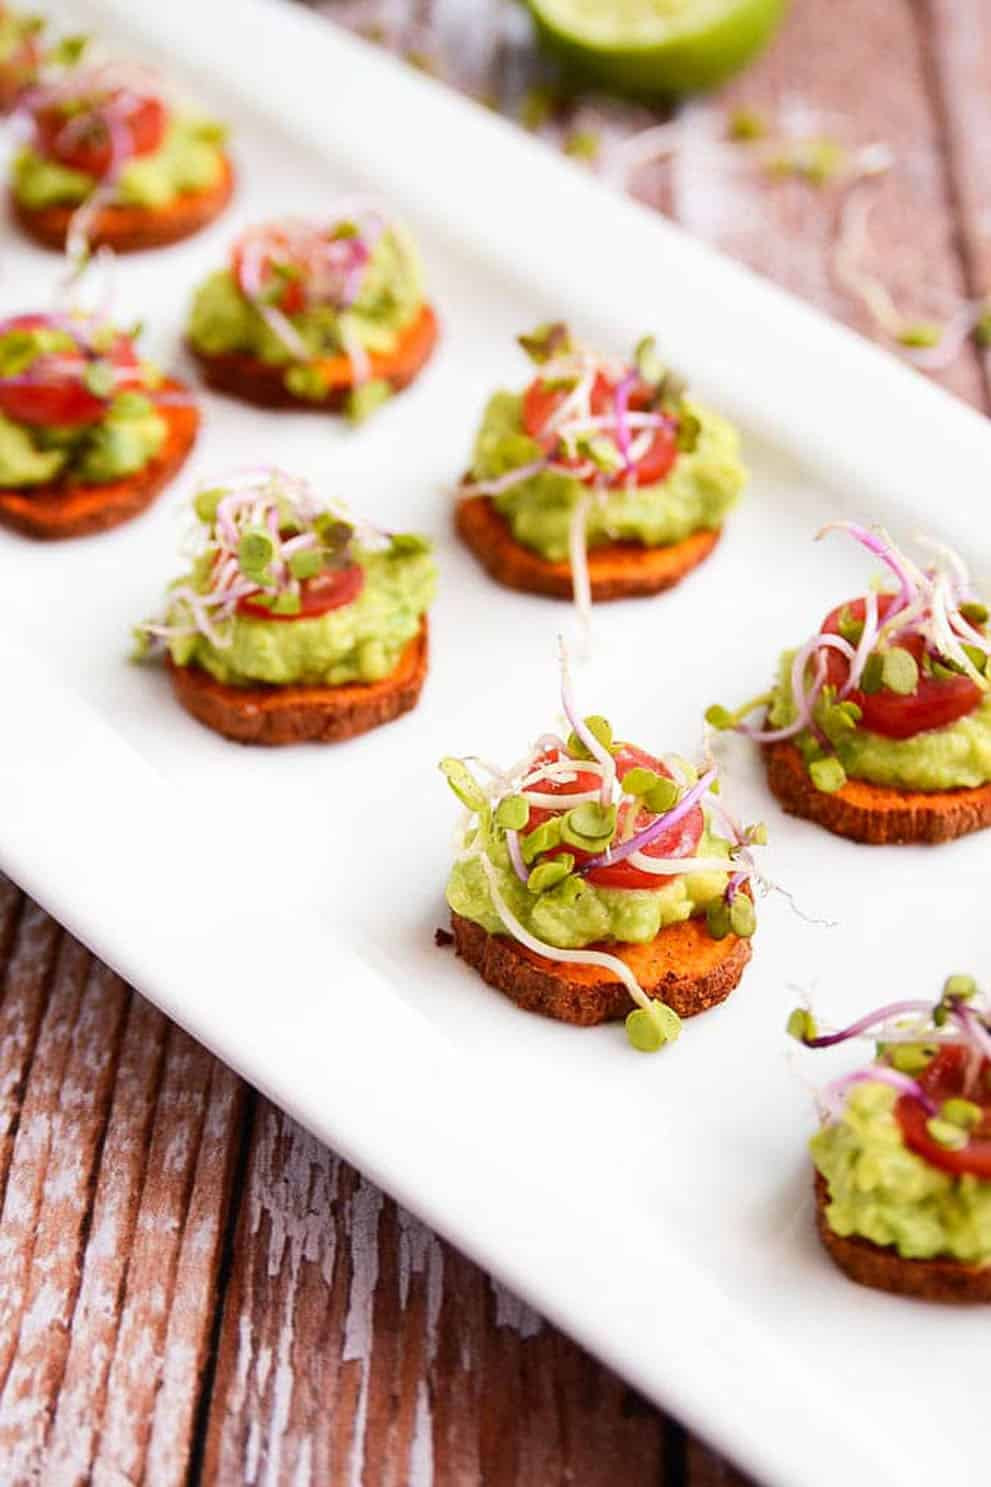 Easy Vegan Appetizers
 50 DELICIOUS AND EASY VEGAN APPETIZERS The clever meal